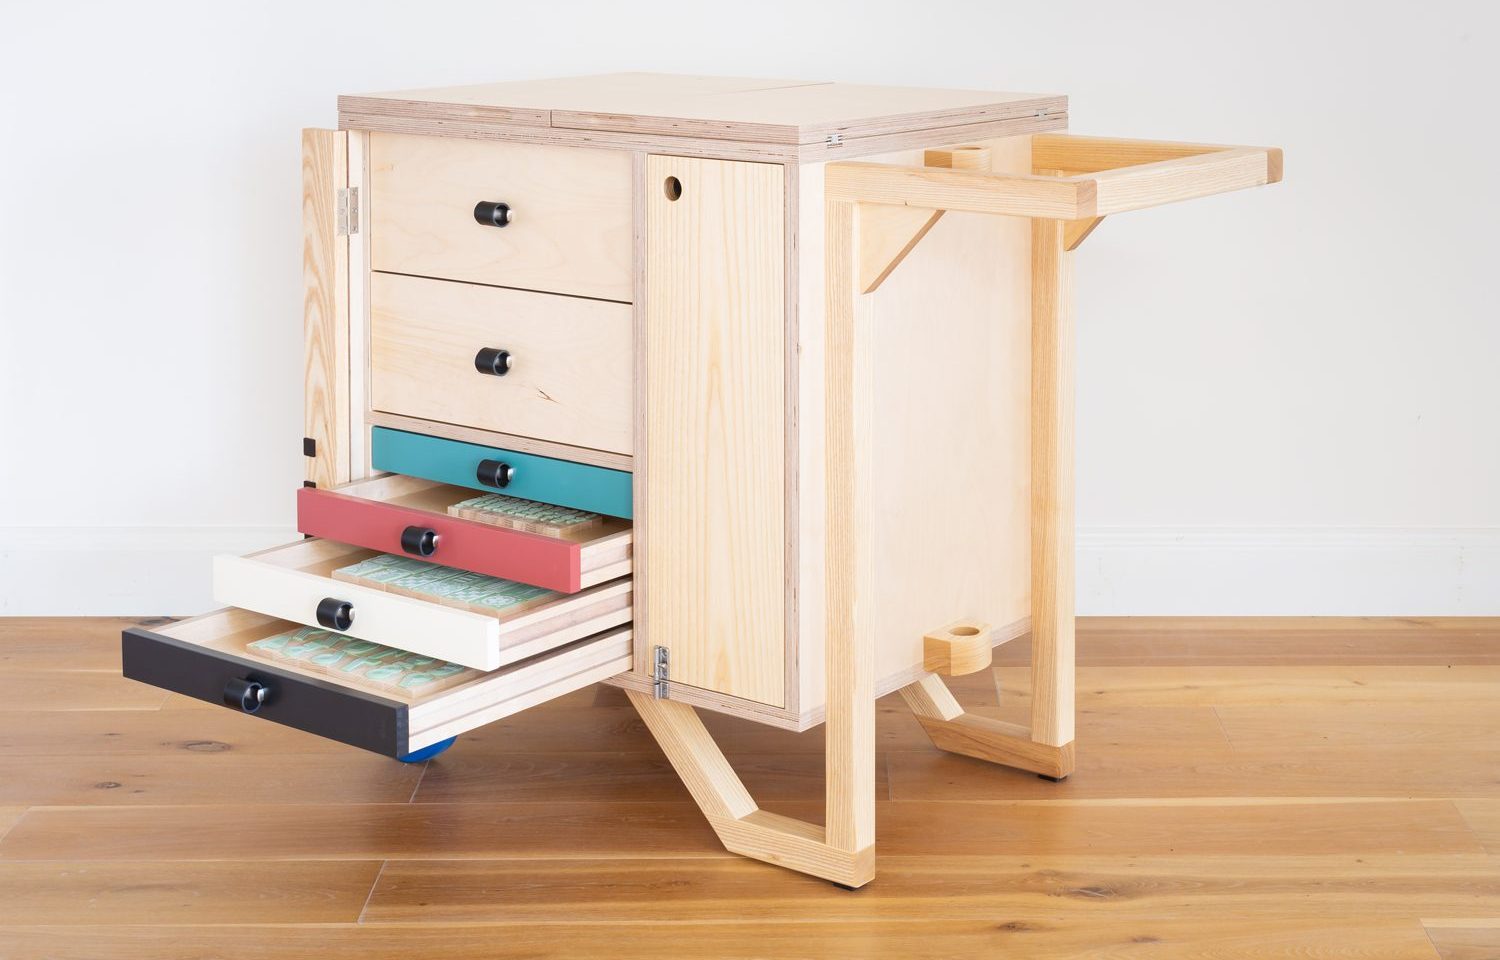 A wooden set of drawers mounted on two wheels. The draws are open revealing wooden blocks used for printing letters